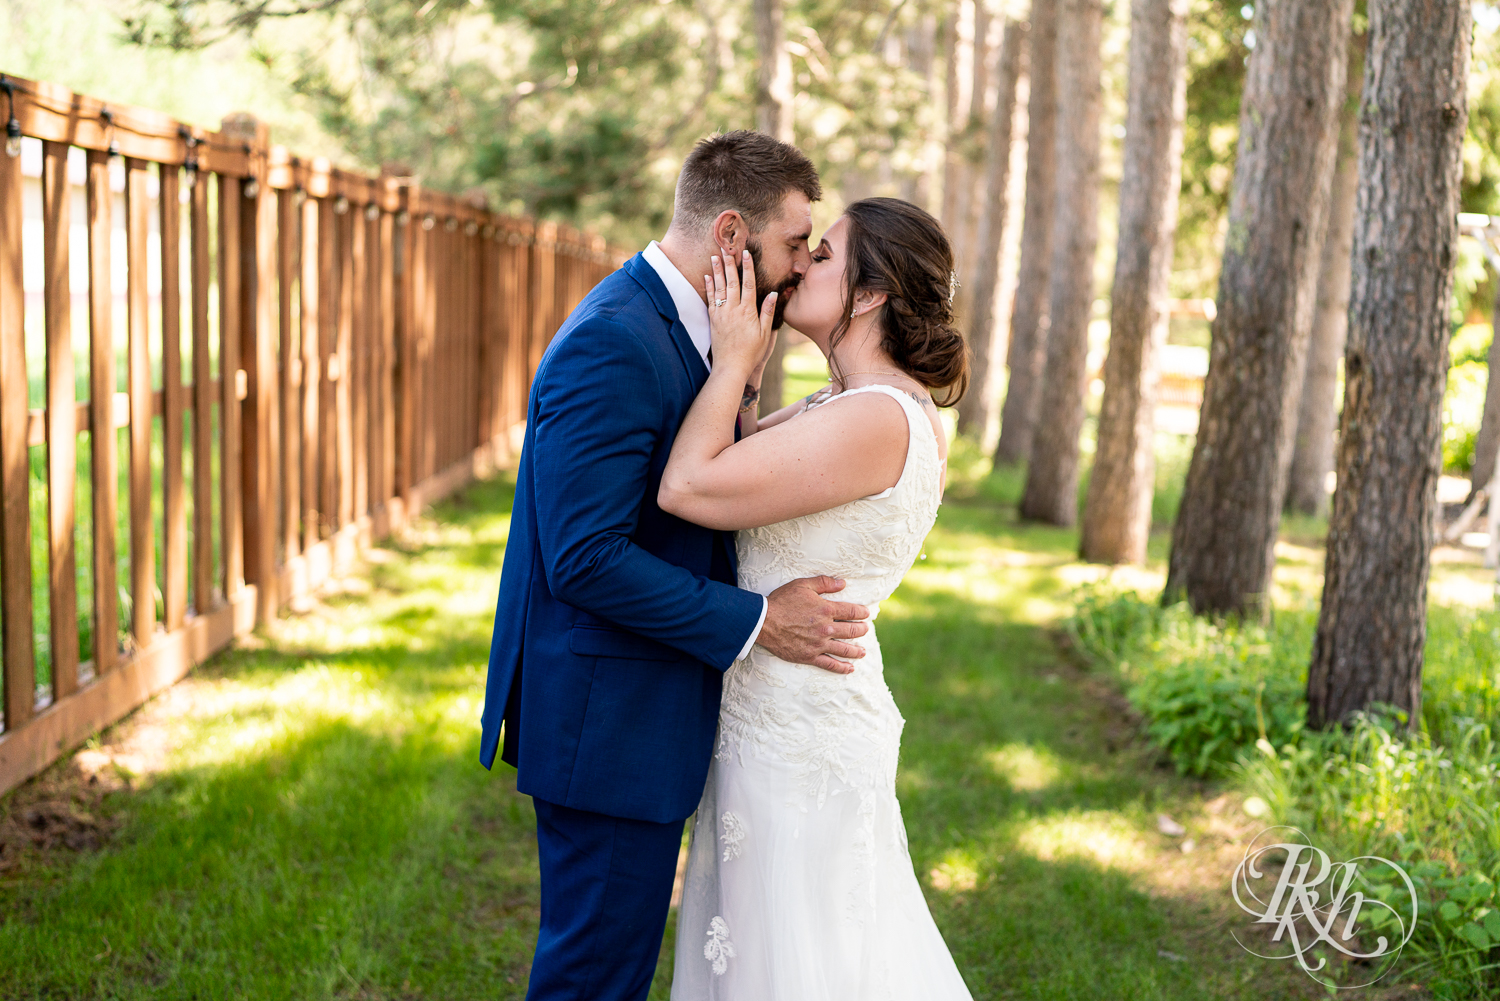 Bride and groom kiss with pine trees at their wedding at Pine Peaks Event Center in Pine River, Minnesota.